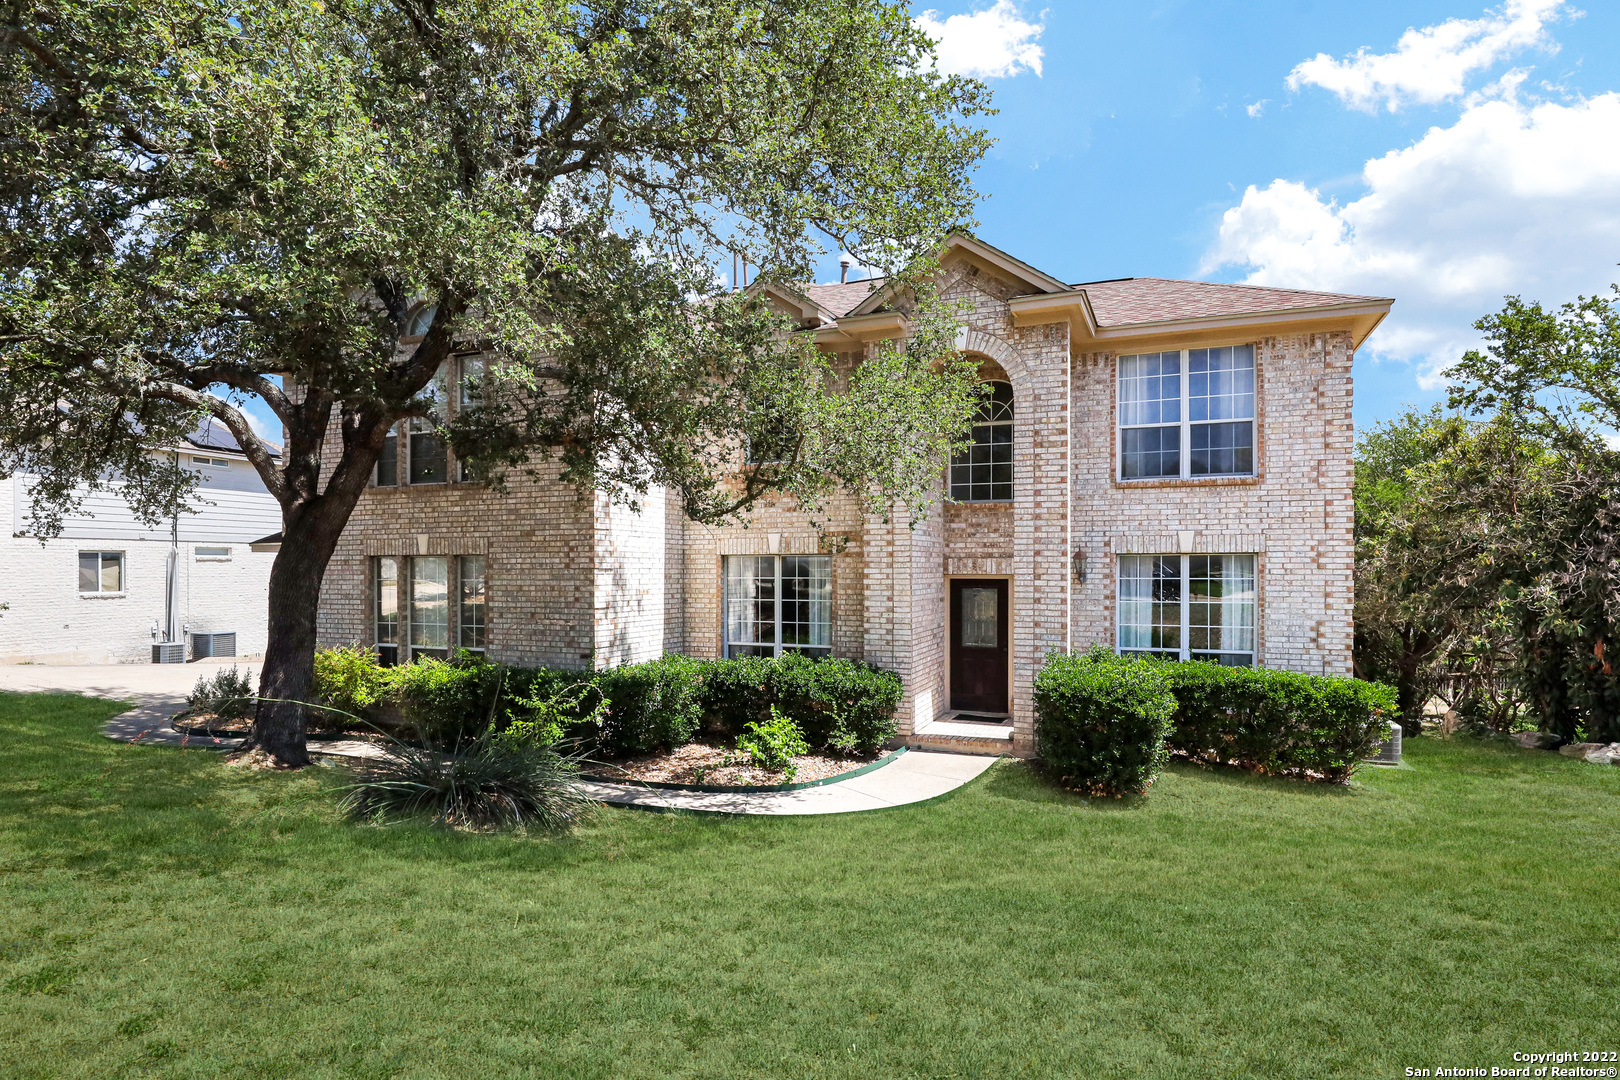 A rare find in a private community at Encino Ranch, in a highly sought NEISD school district!  This property is located on just under HALF AN ACRE LOT, featuring an open concept floor plan, 5 bedroom, 3.5 bath, formal living room, dining room, family room overlooking the kitchen, large game room, and a secondary bedroom/flex room with full bath on the first floor, tankless water heater, water softener, and a unique central vacuum in the home.  Enjoy your spacious owner's retreat that has it's own HIS and HERS closet! 2 A/C unit was replaced in 2018 and roof was replaced in 2019!  The house is equipped with safety features such as nest thermostats with smoke/alarm detector throughout the house that can alert you through your phone, control and monitor/save electricity.  Enjoy the ambiance of the hill country feel in this home, greenbelt backyard for privacy and lots of mature trees all around the property. Enough backyard space for a pool if you so desire! Exterior walls of the house and the outdoor deck was recently painted to give it a fresh look! Come and see this home and call it your own!***BULVERDE ENTRY GATE DOES NOT OPEN FOR PUBLIC **PLEASE Take E Evans Rd to Mason Wood Drive then to Navasota Cir   ***All carpet in the house will be replaced prior to closing. ***Seller is offering to pay all closing costs.